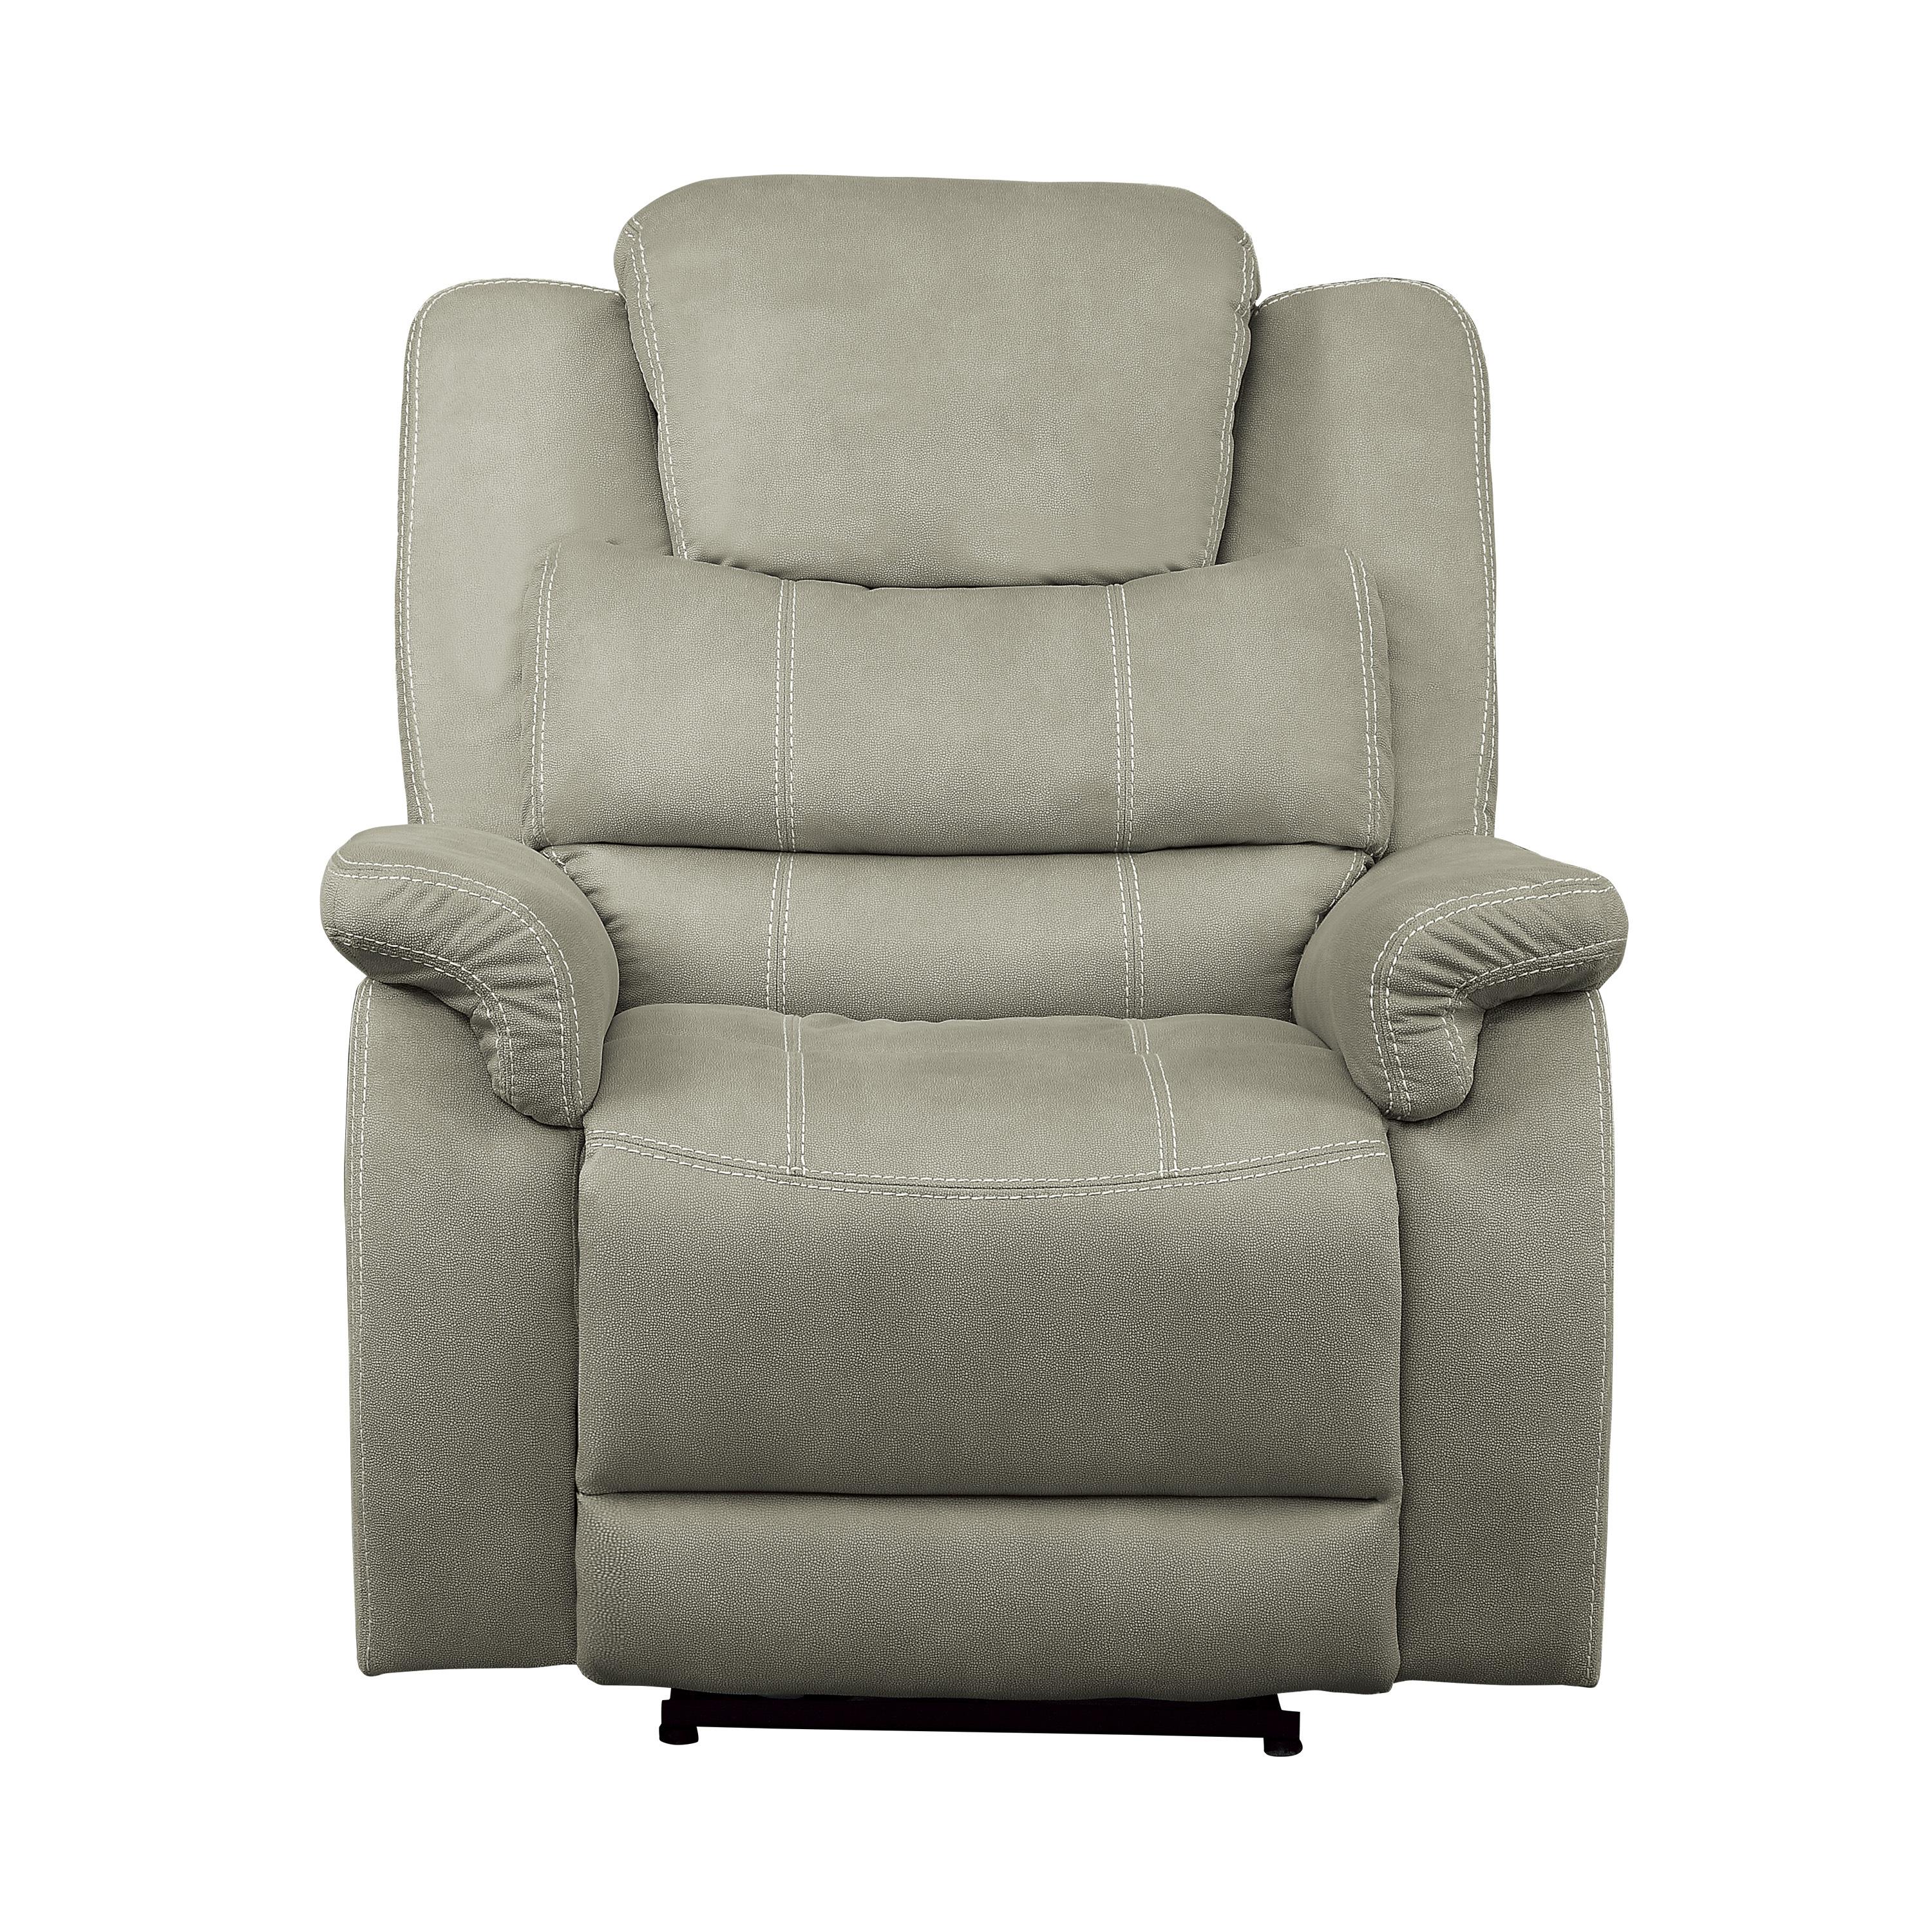 Transitional Power Reclining Chair 9848GY-1PWH Shola 9848GY-1PWH in Gray Microfiber